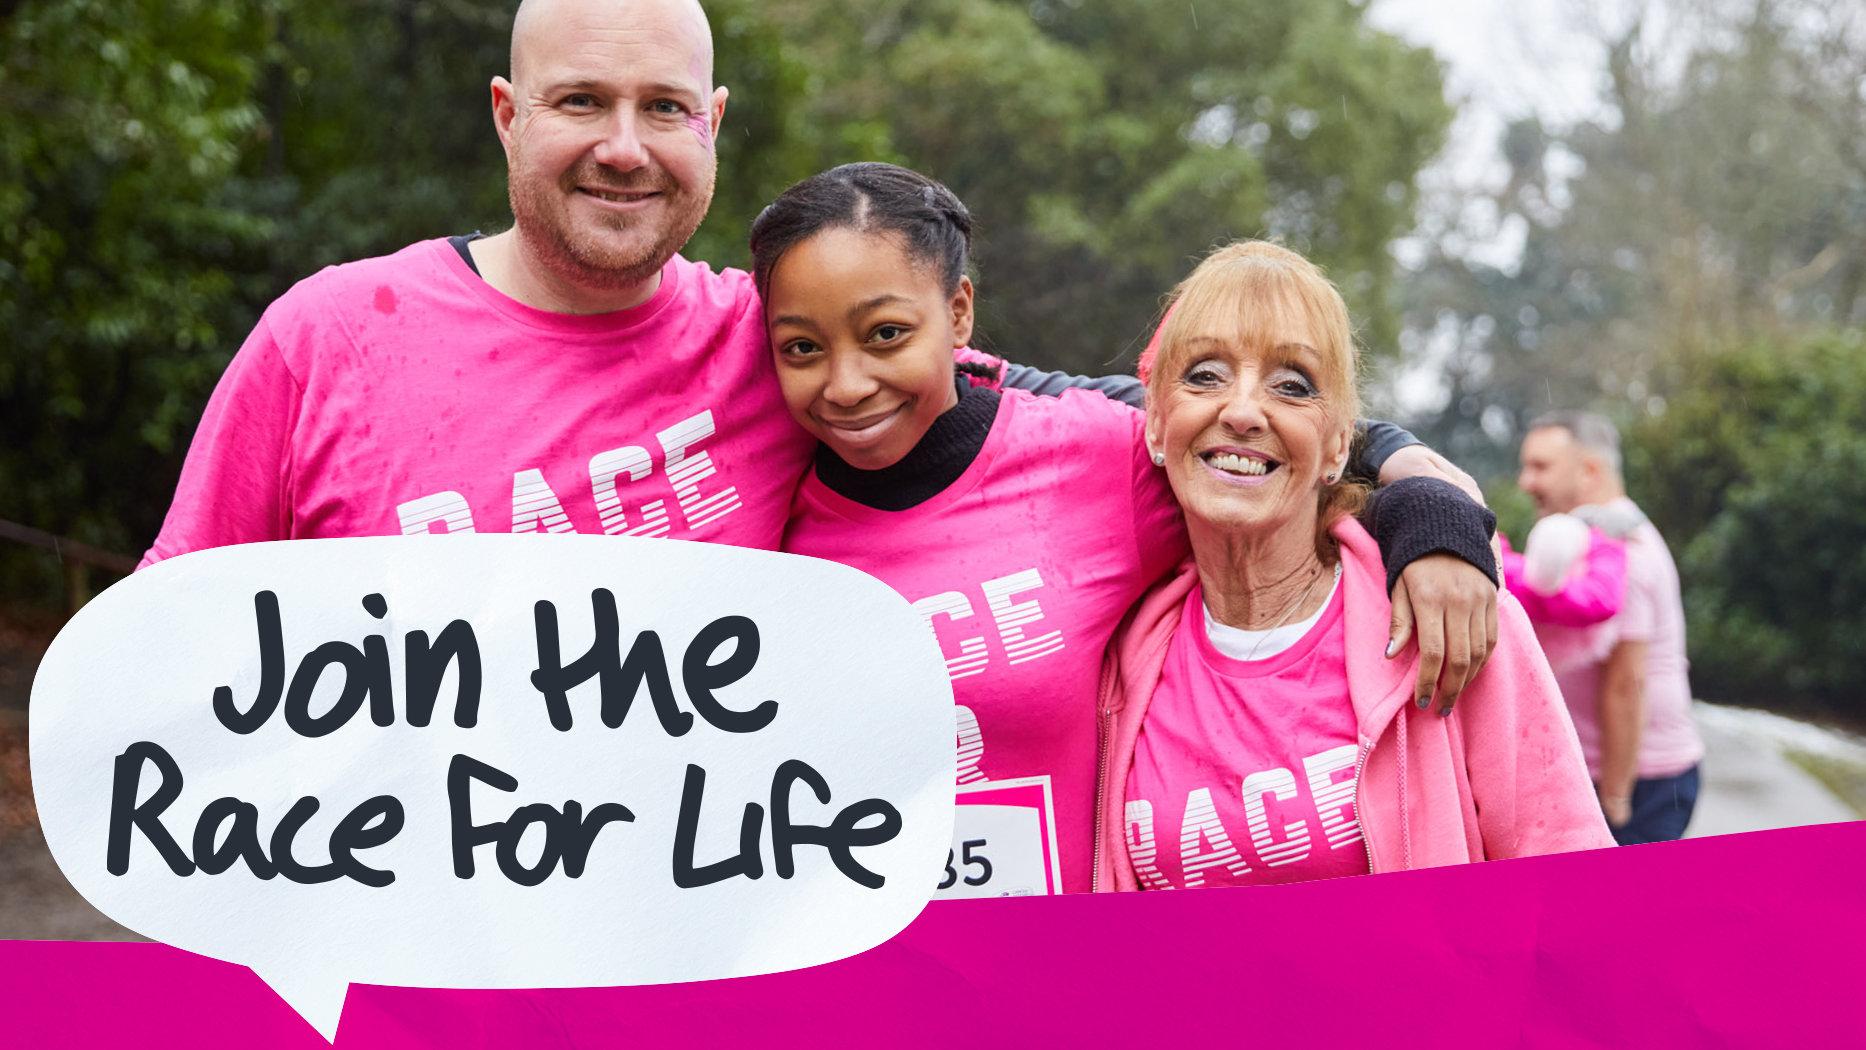 Race for life 2022